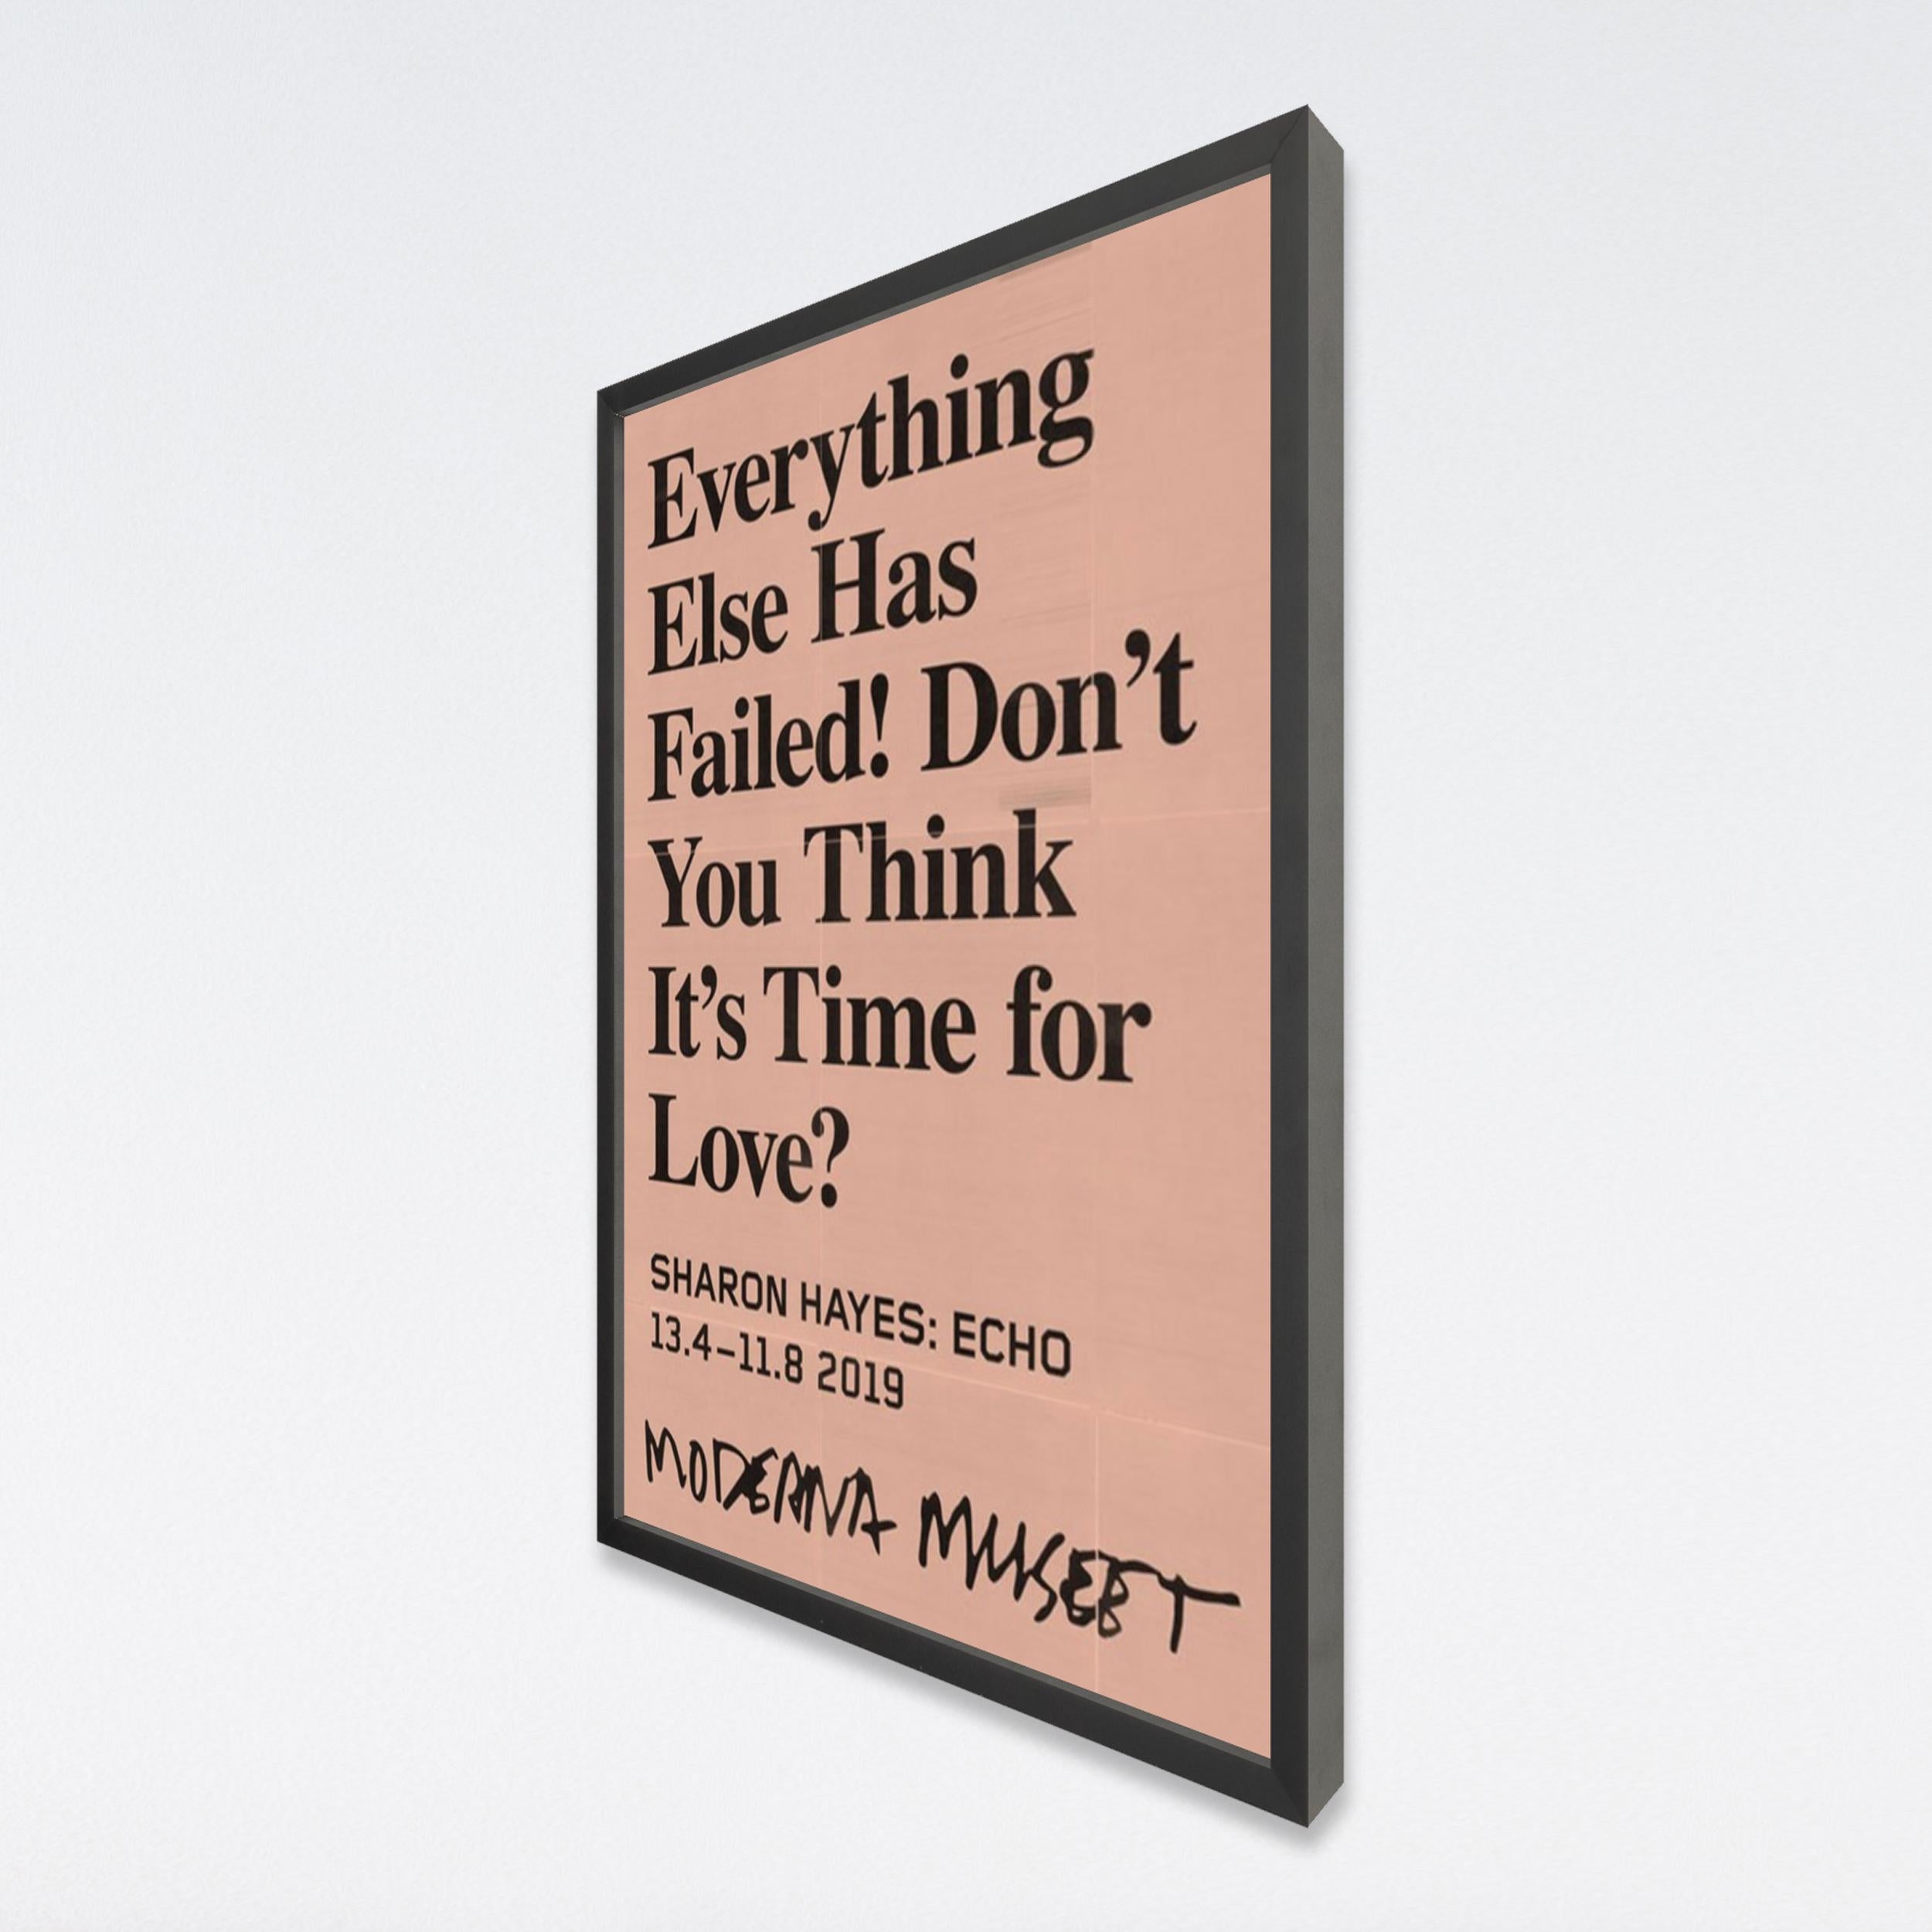 Everything Else Has Failed! Don't You Think It's Time for Love? Museum Poster - Feminist Print by Sharon Hayes